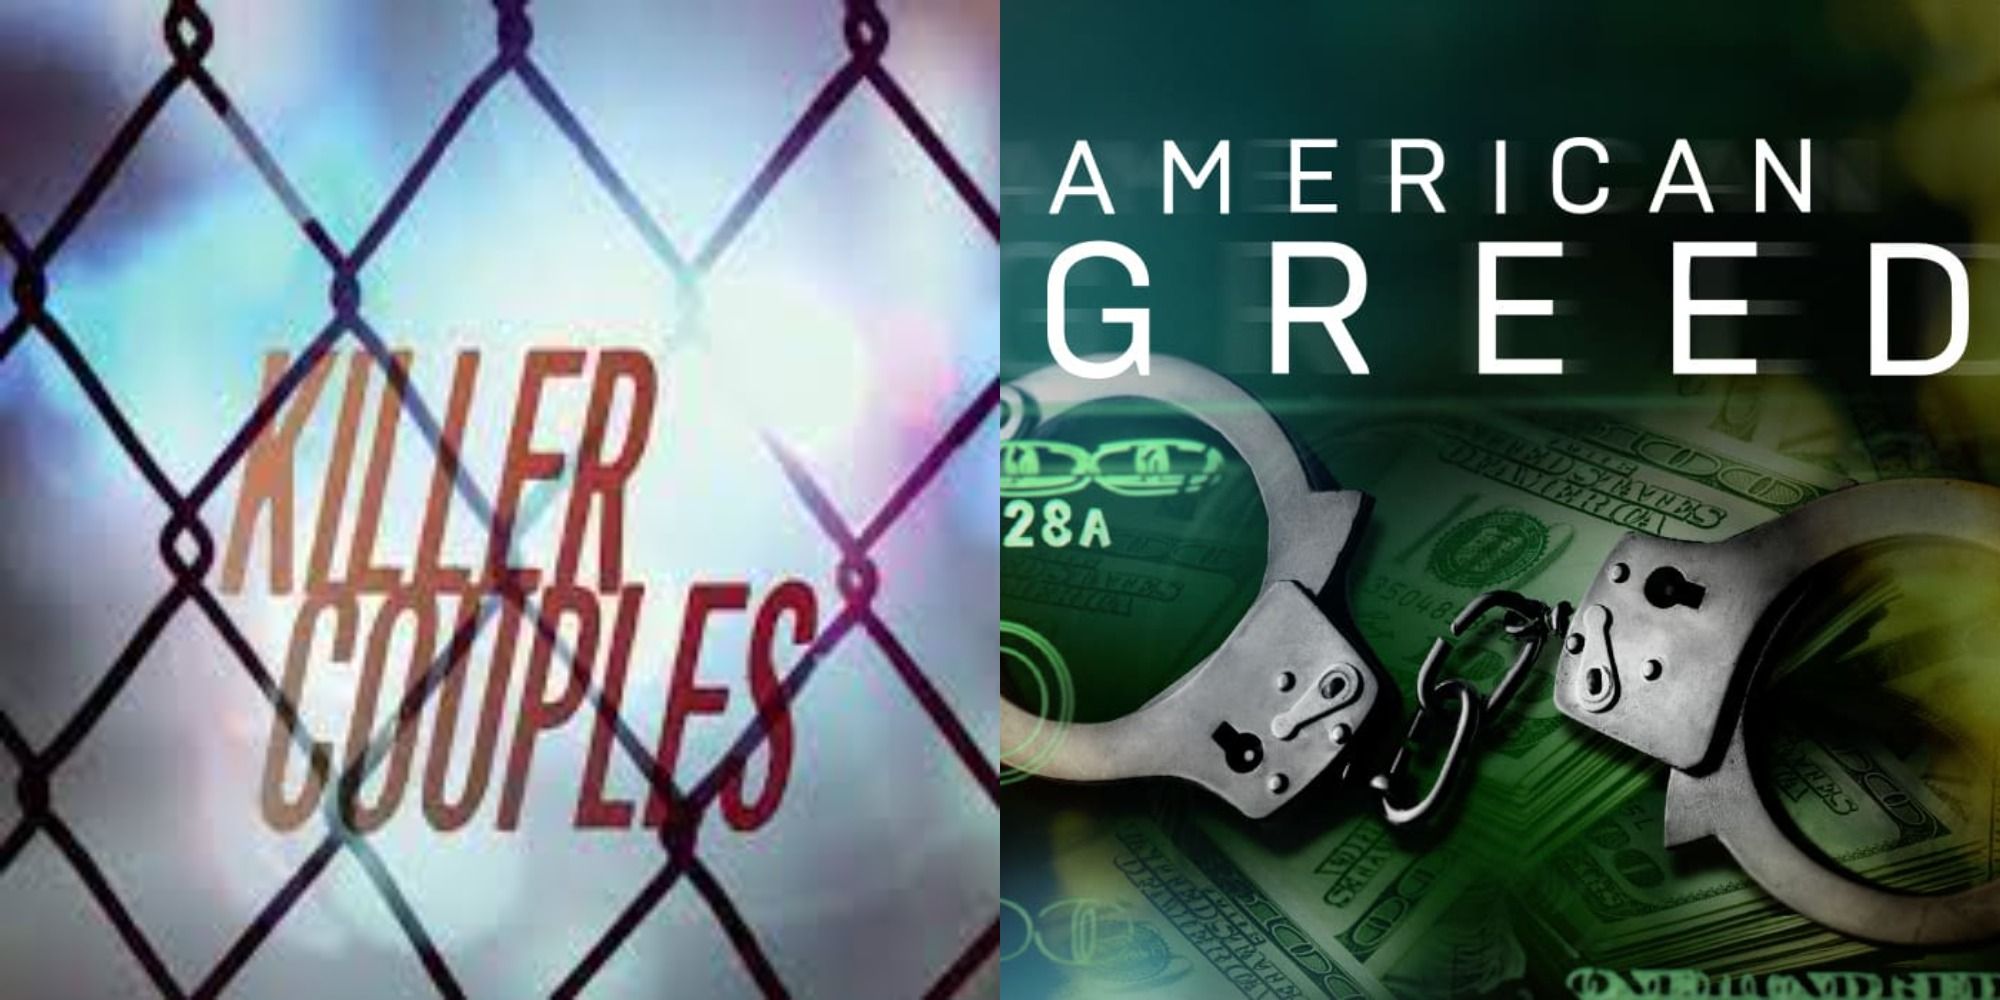 Split image of the title cards for Killer Couples and American Greed